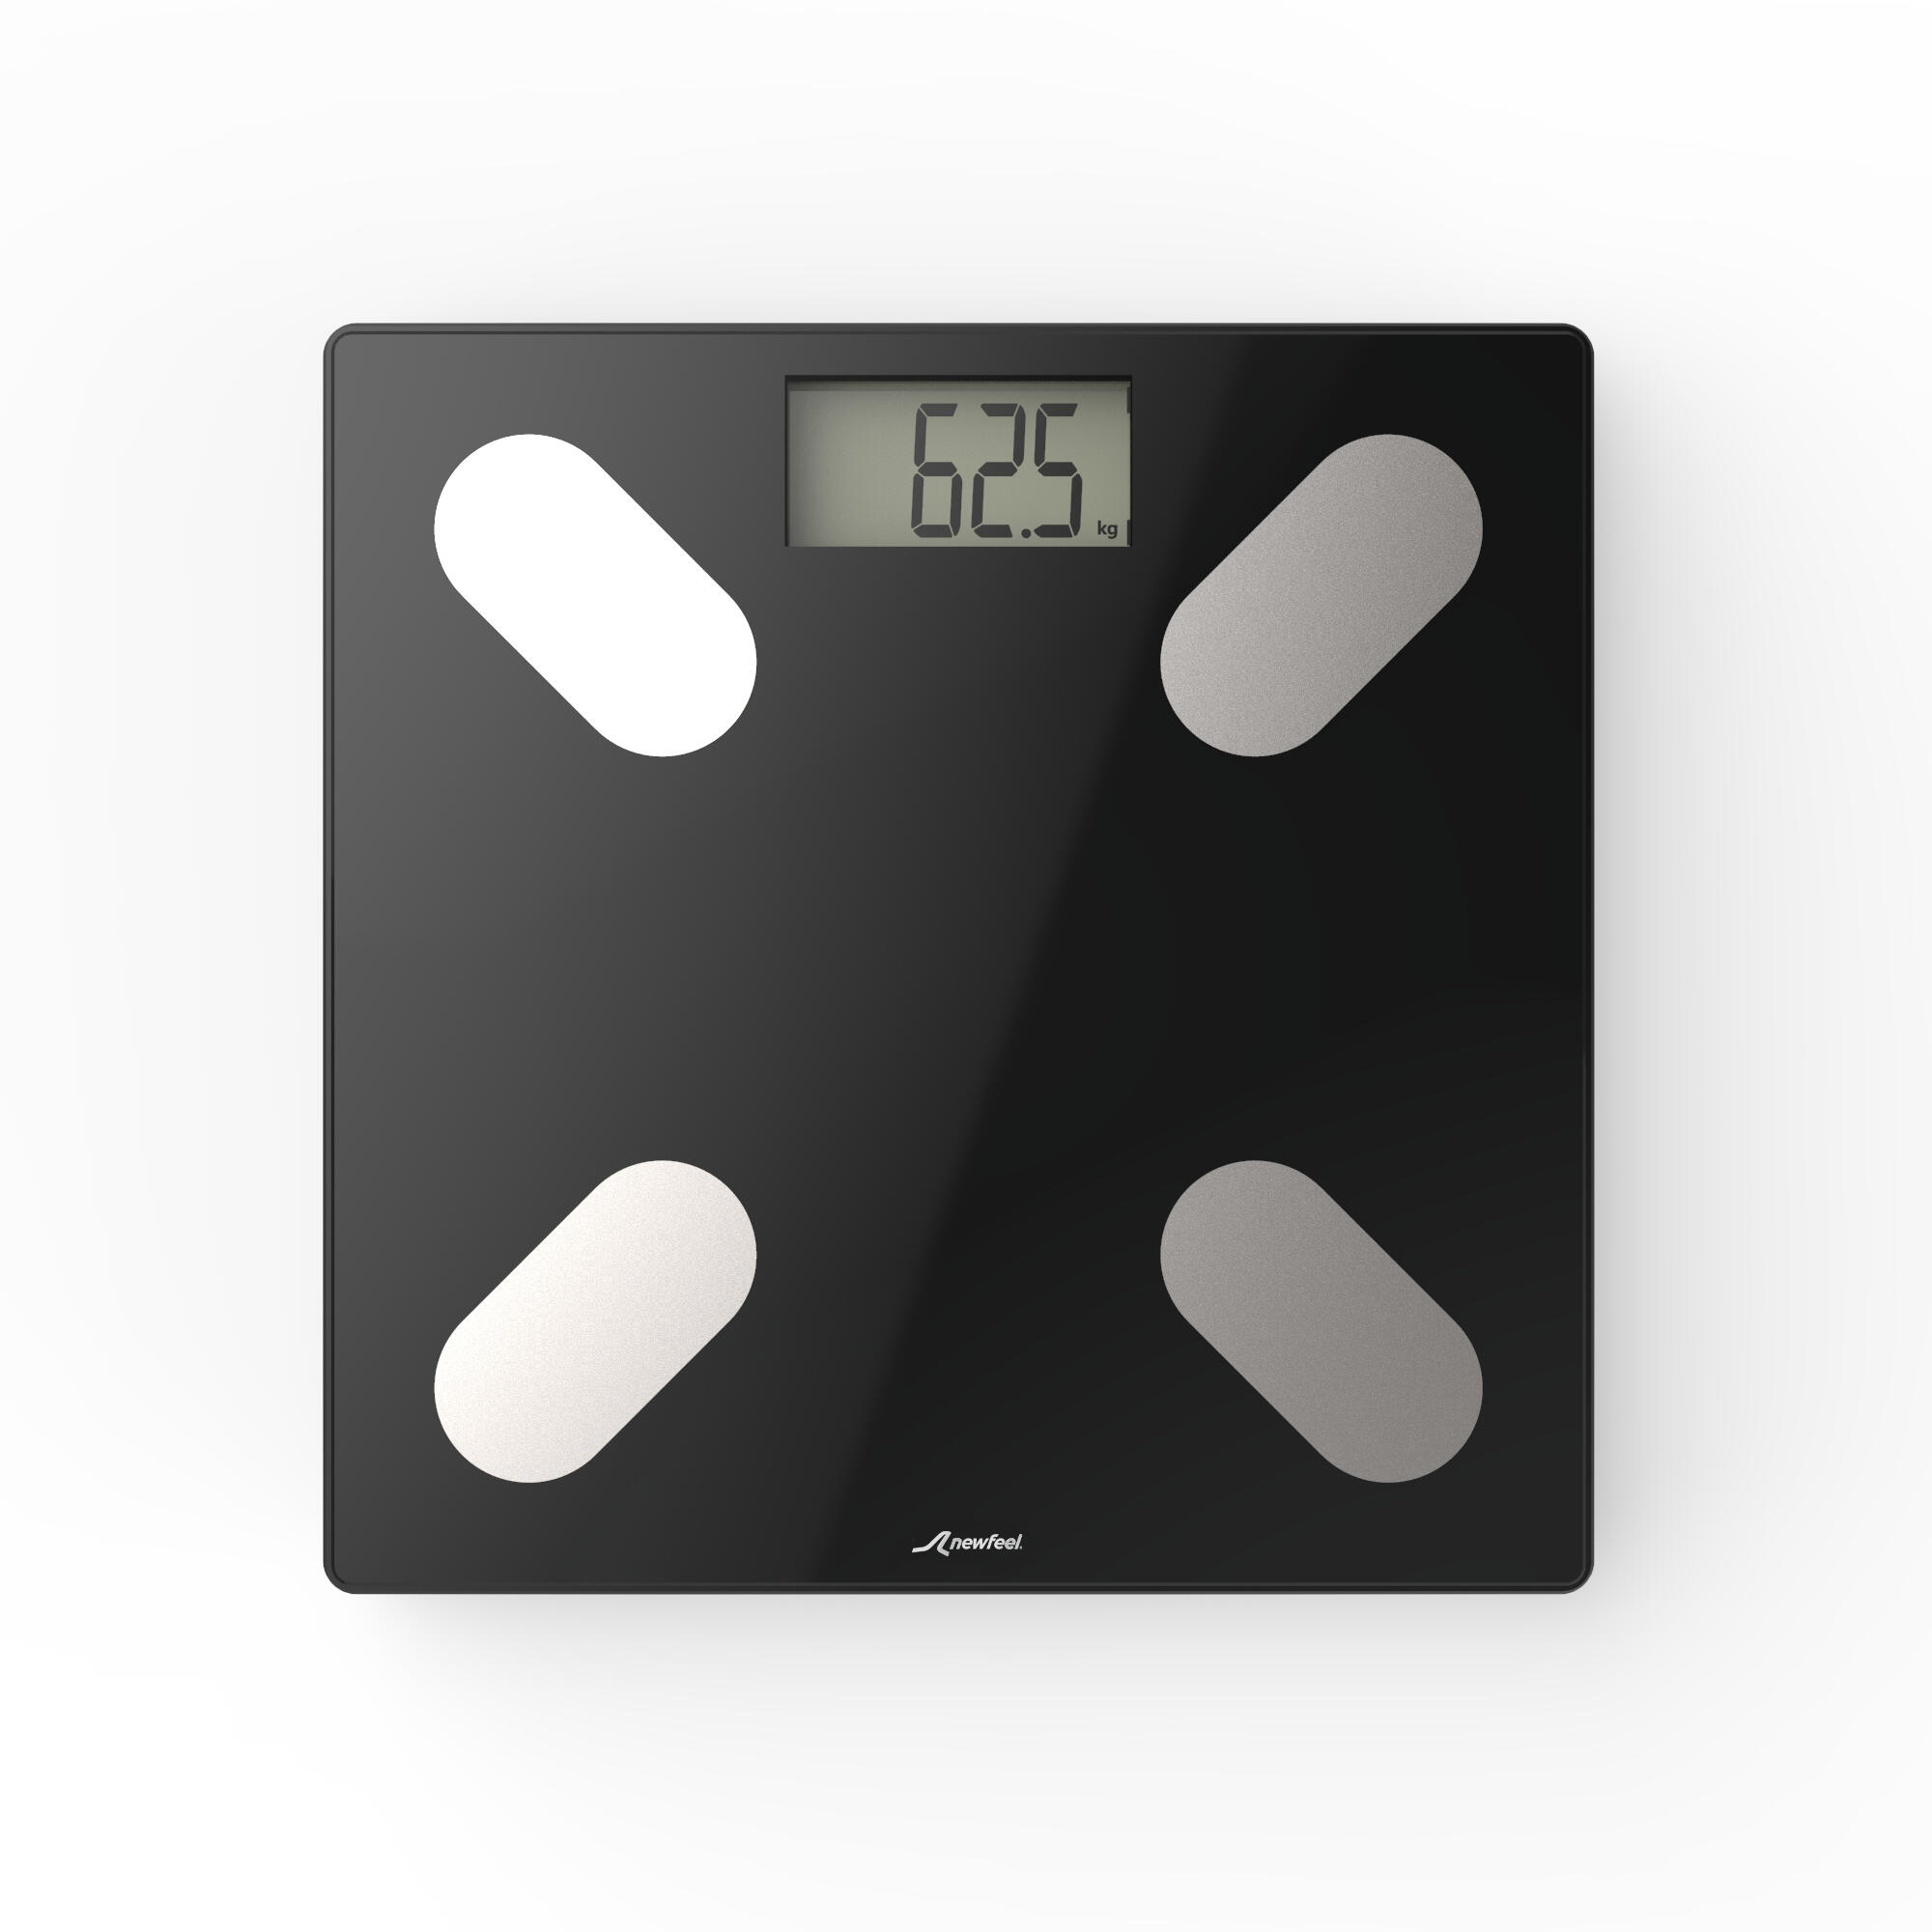 Scale with Impedance Meter - Scale 500 Glass - NEWFEEL